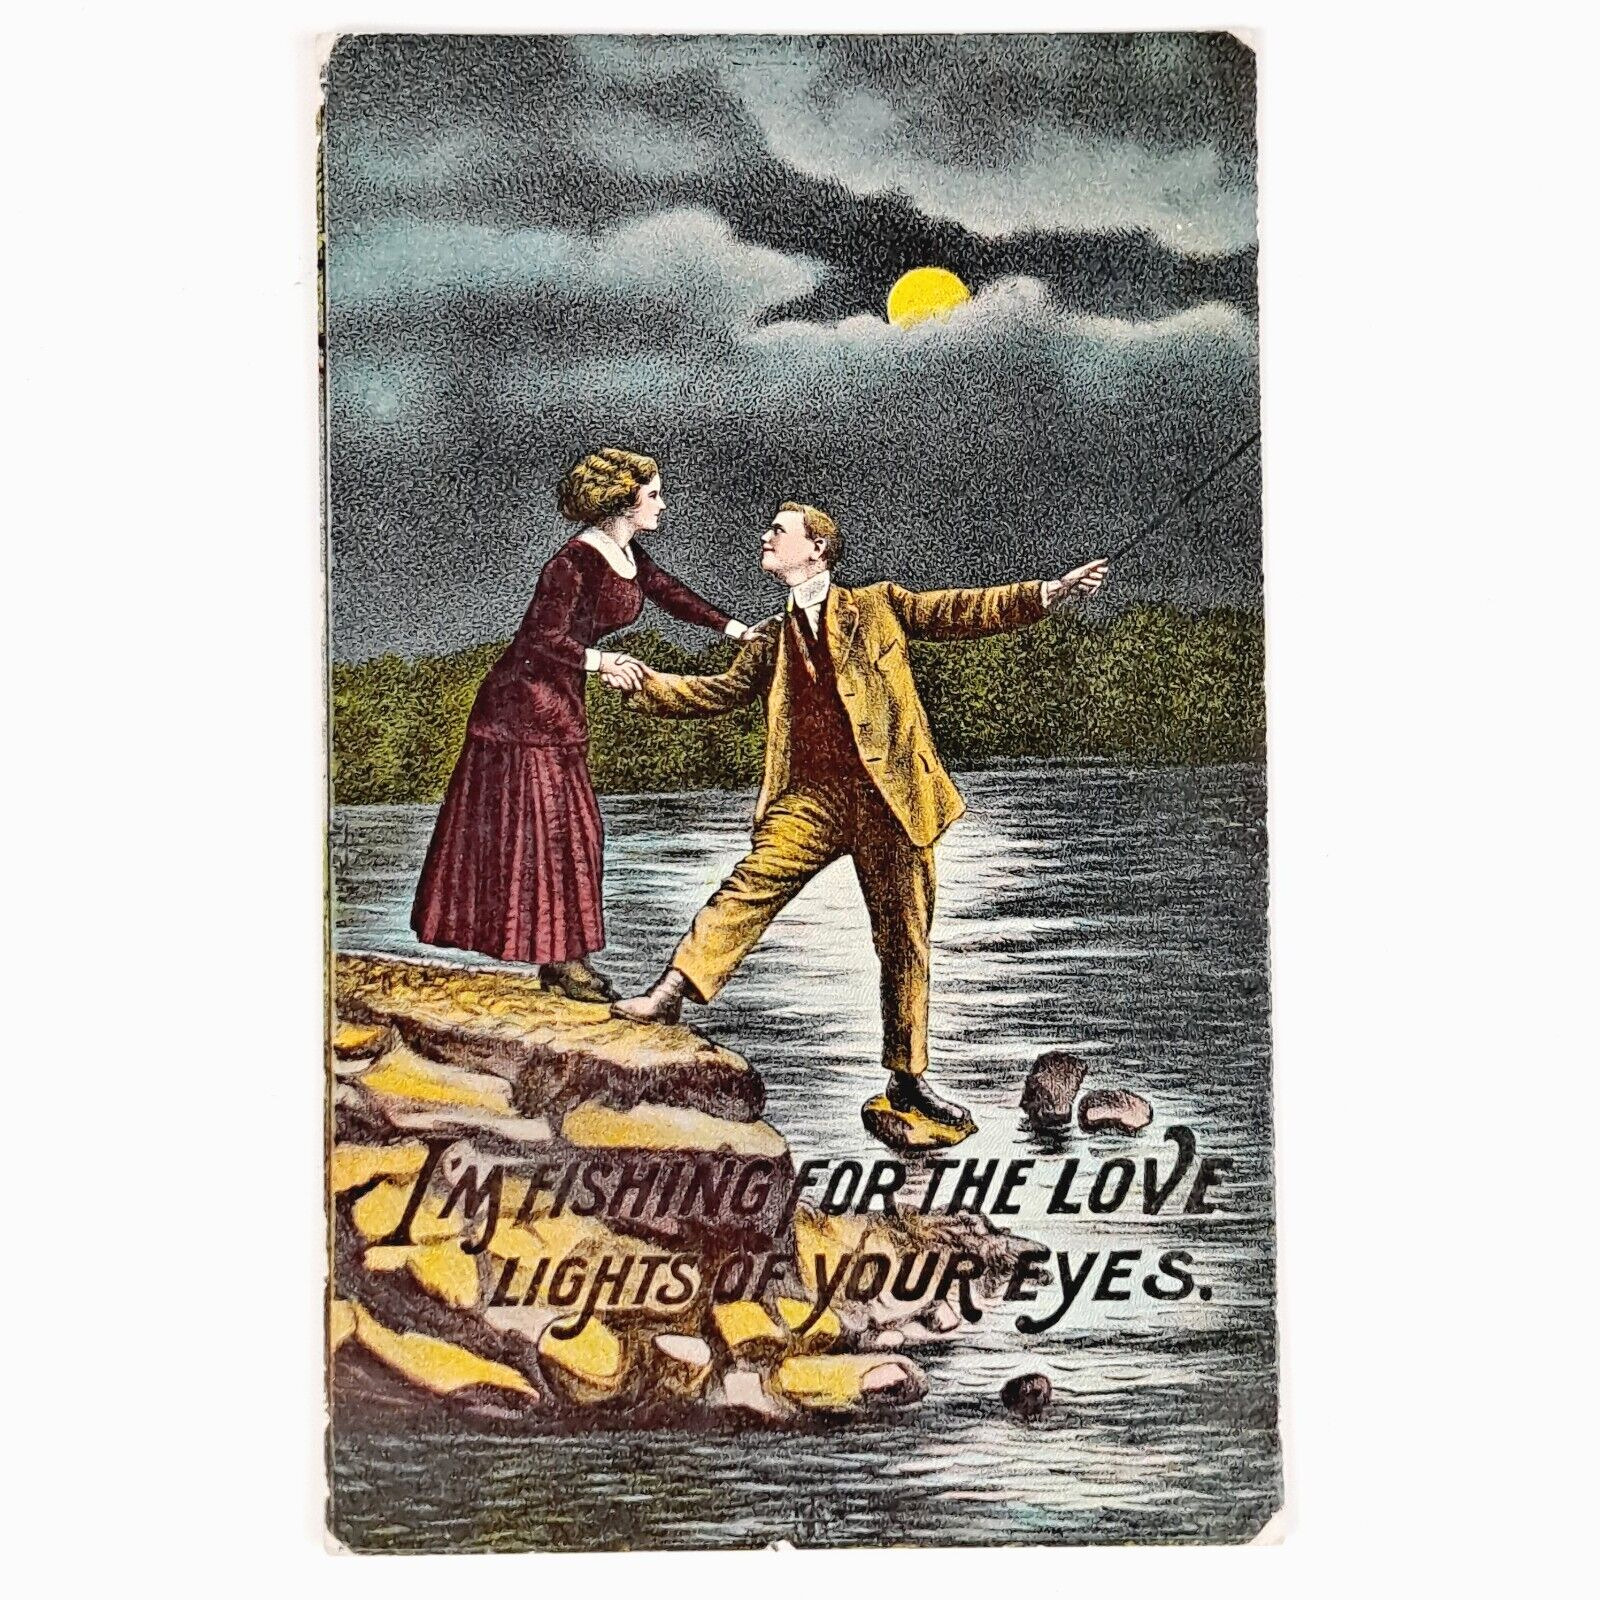 ANTIQUE 1911 POST CARD LOVE & ROMANCE FISHING FOR LOVE FLIRT POSTCARD - POSTED